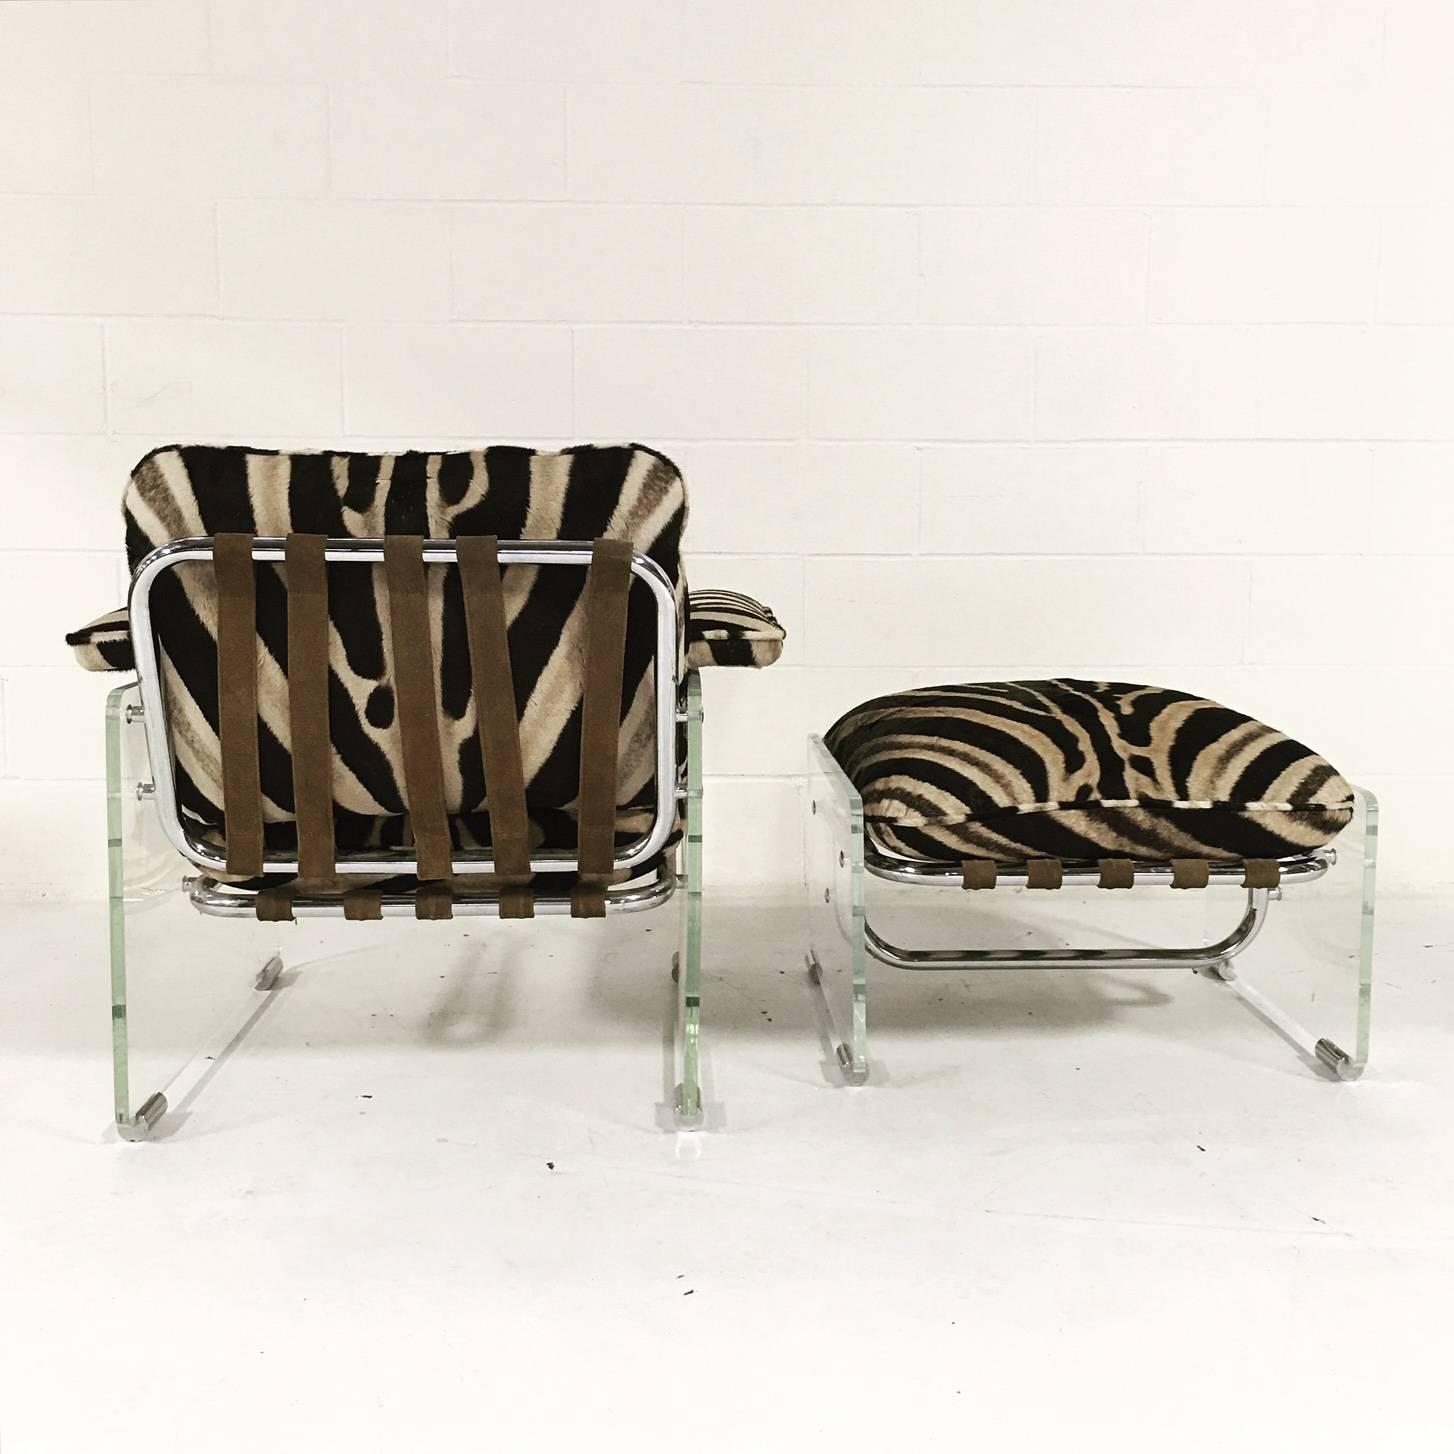 Italian Pace Collection Argenta Lucite and Chrome Lounge Chair and Ottoman in Zebra Hide